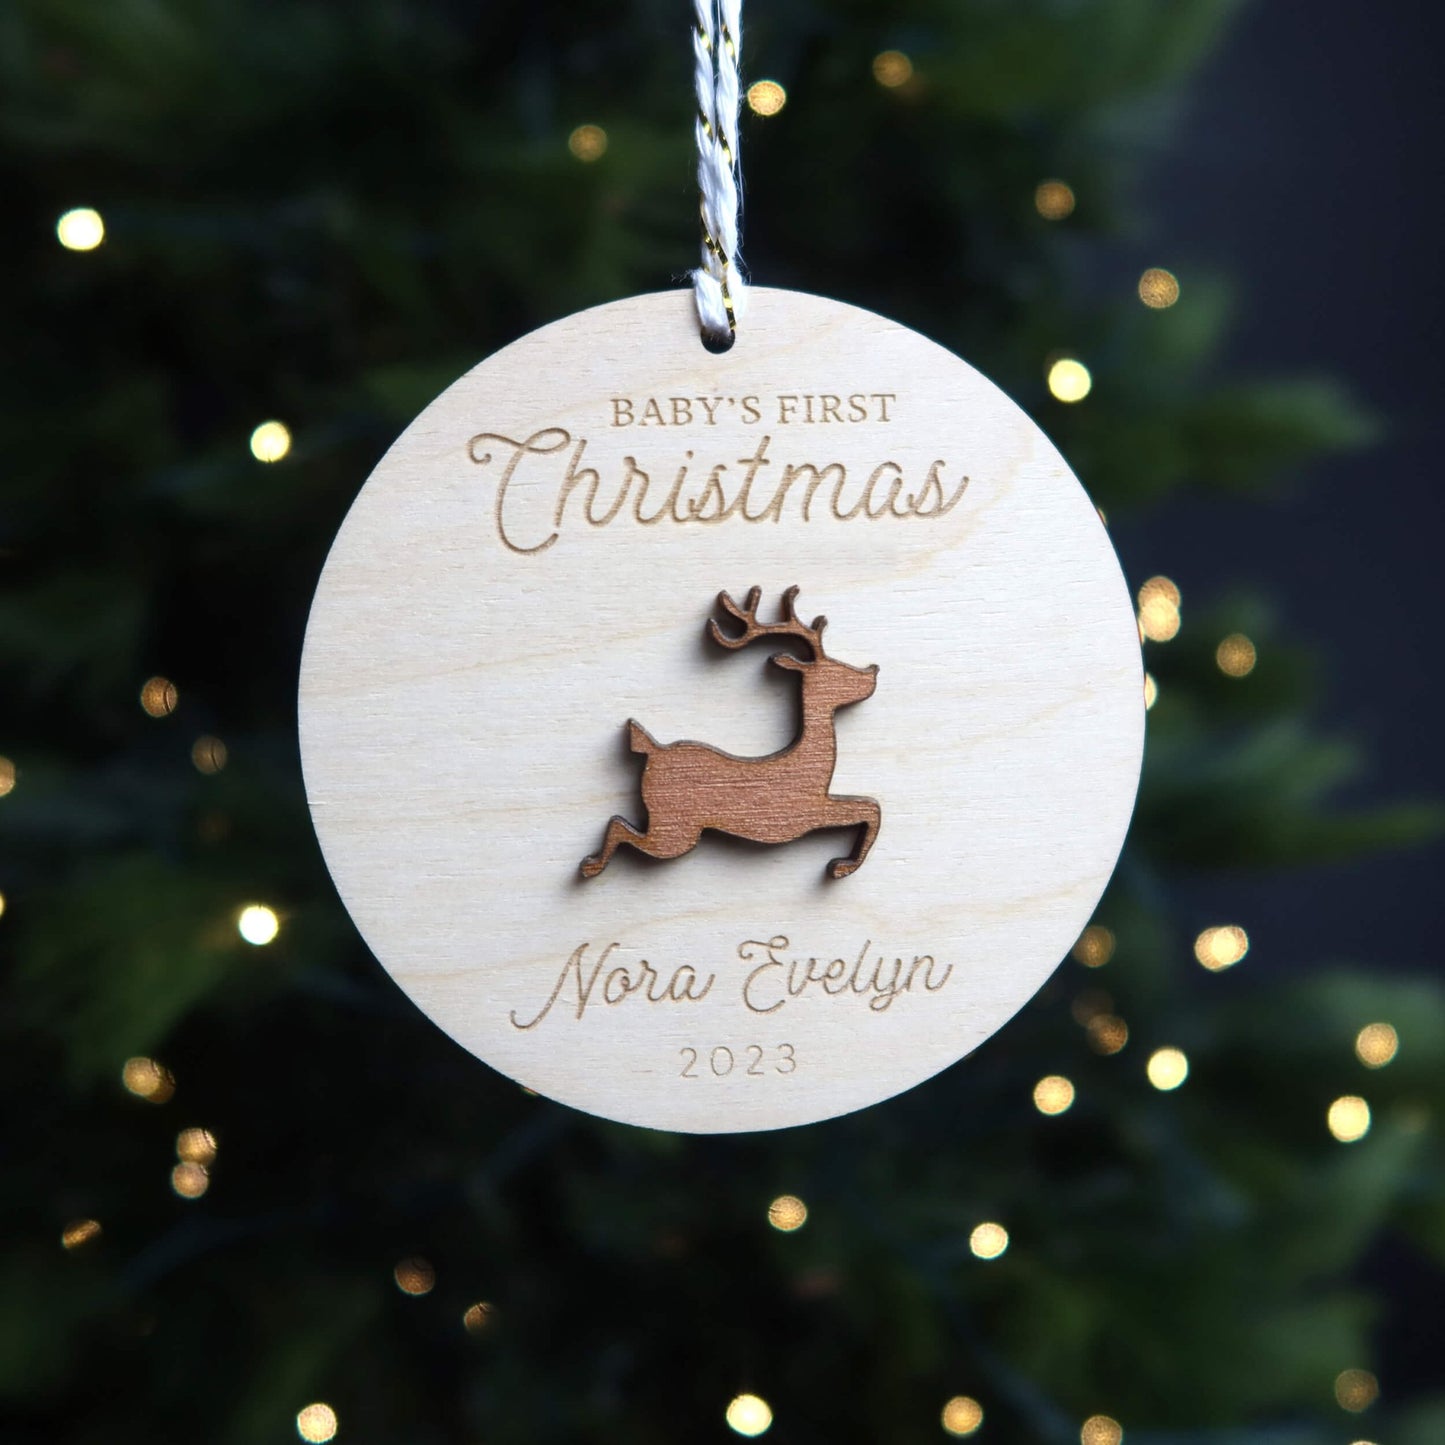 Reindeer Baby's First Christmas Ornament Personalized - Holiday Ornaments - Moon Rock Prints